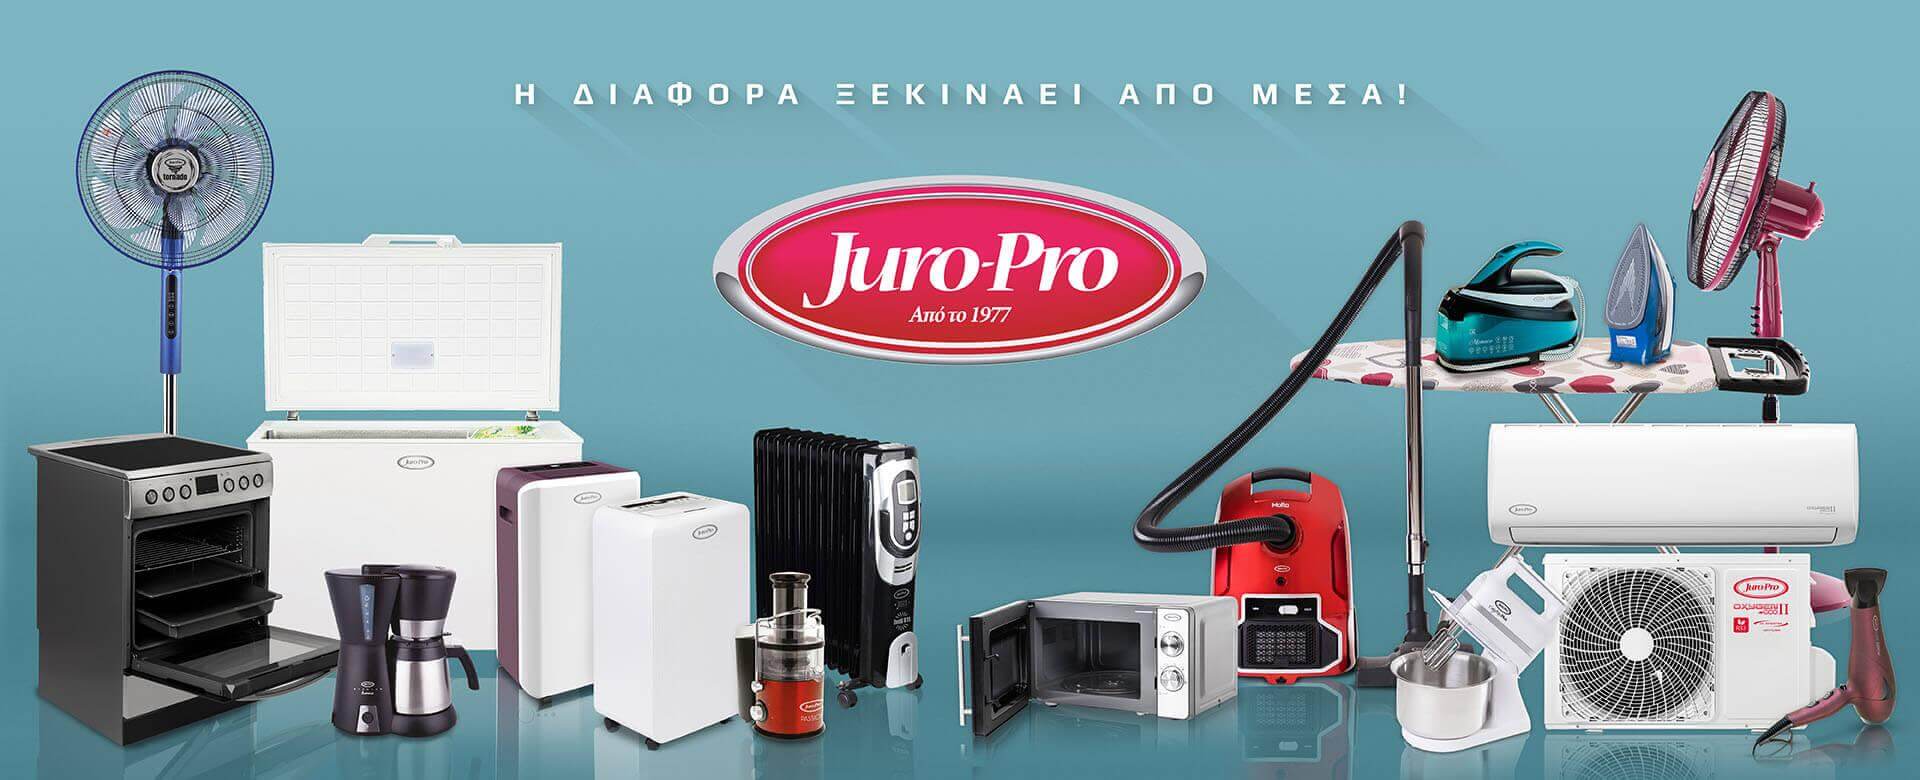 PRODUCTS OF JURO PRO